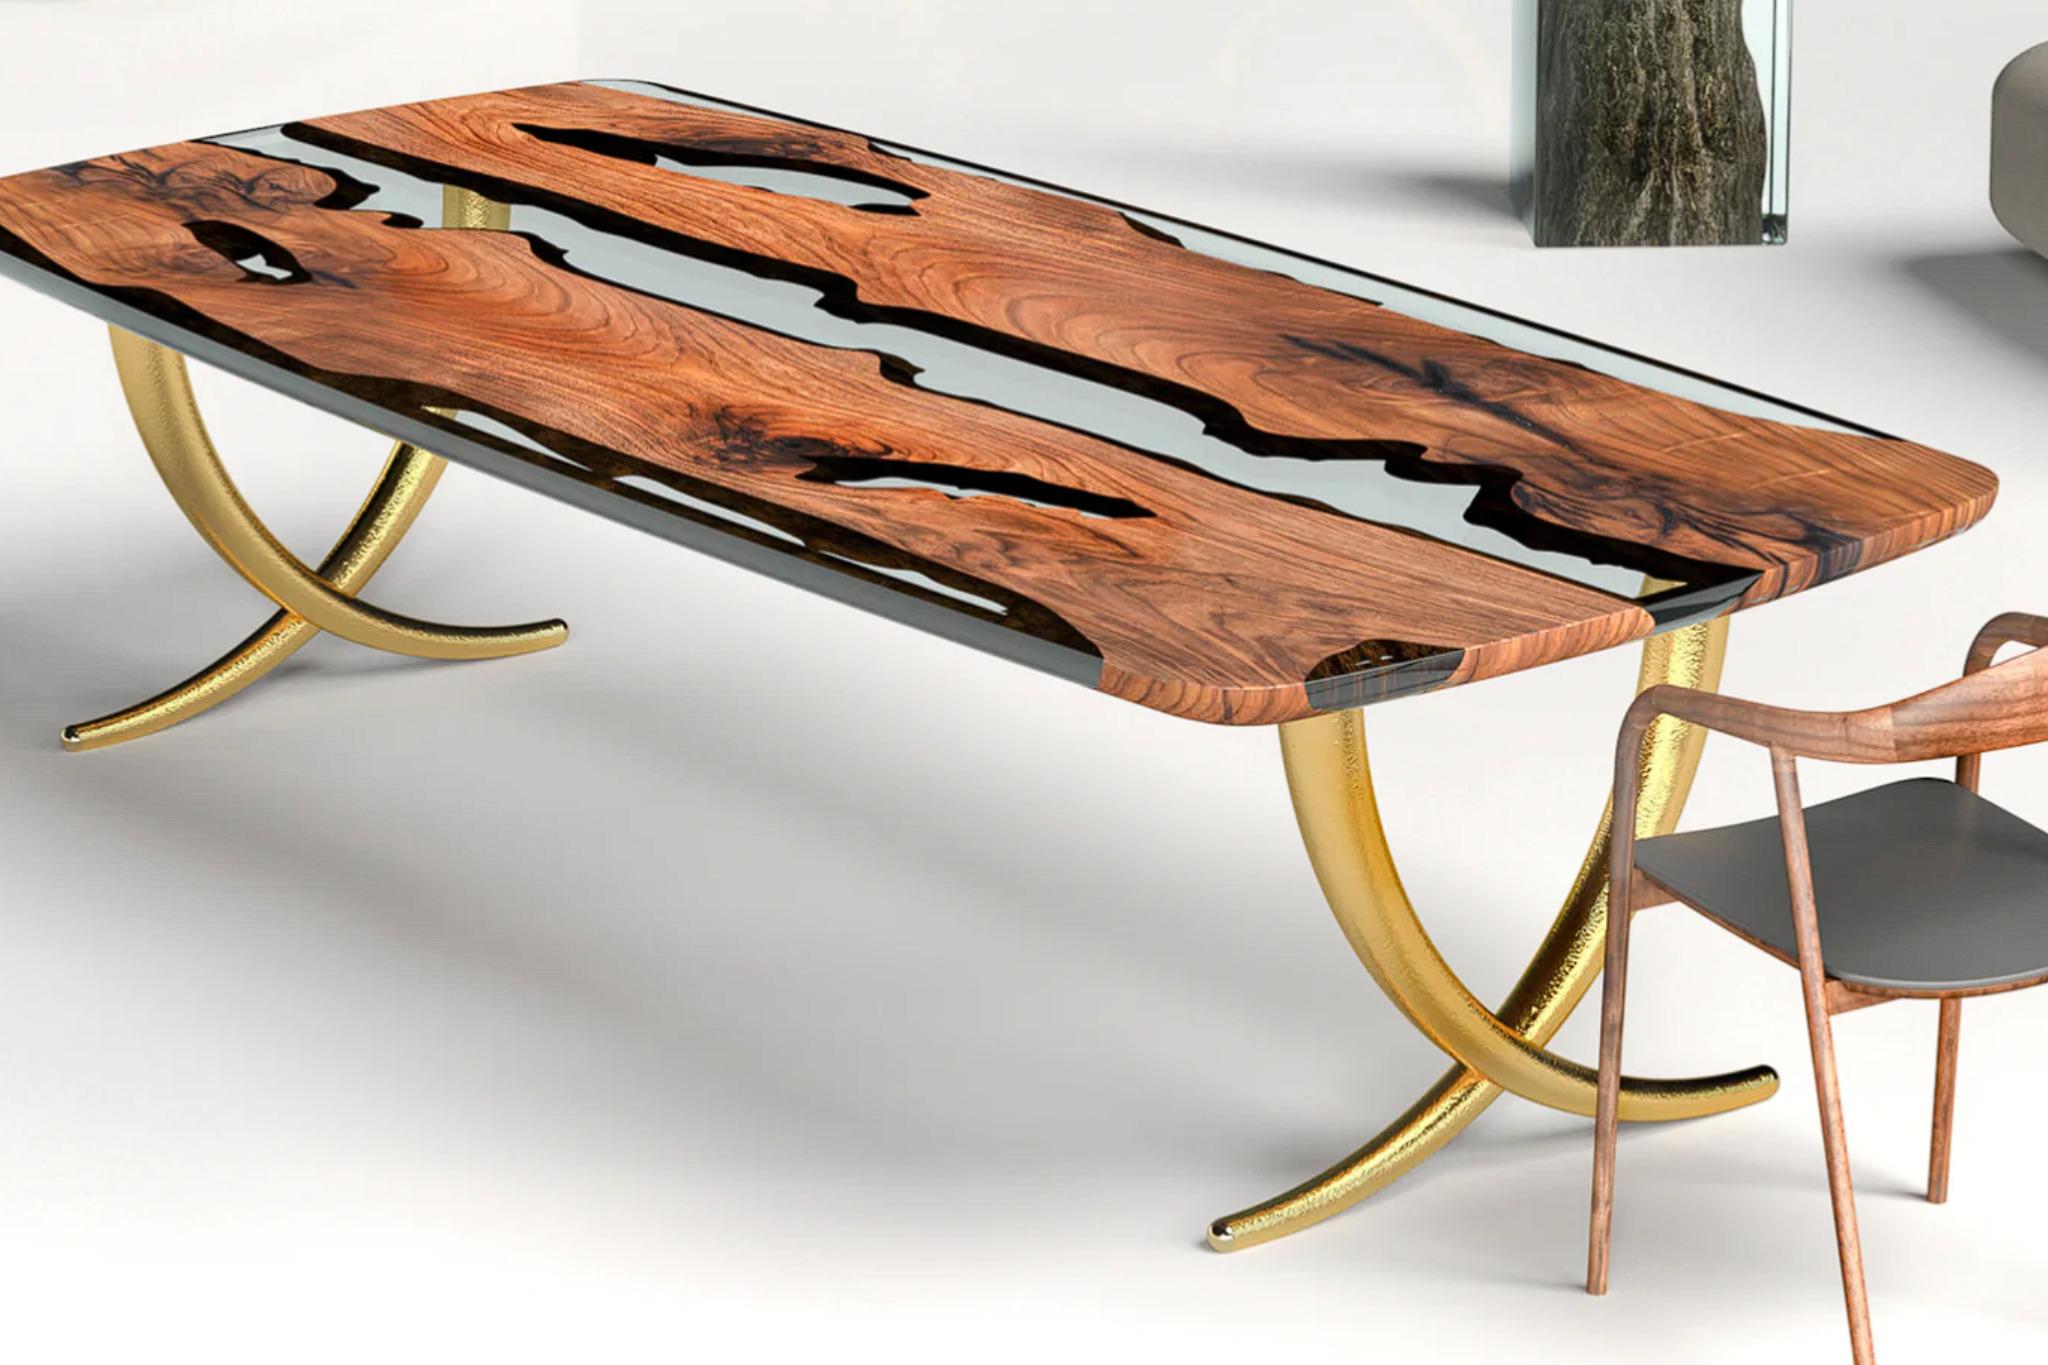 The table is made using solid Anatolian walnut wood, which is renowned for its strength and durability. 

What makes this table truly unique is its base, which is crafted using around 40 thousand hammer strikes, resulting in a truly one-of-a-kind